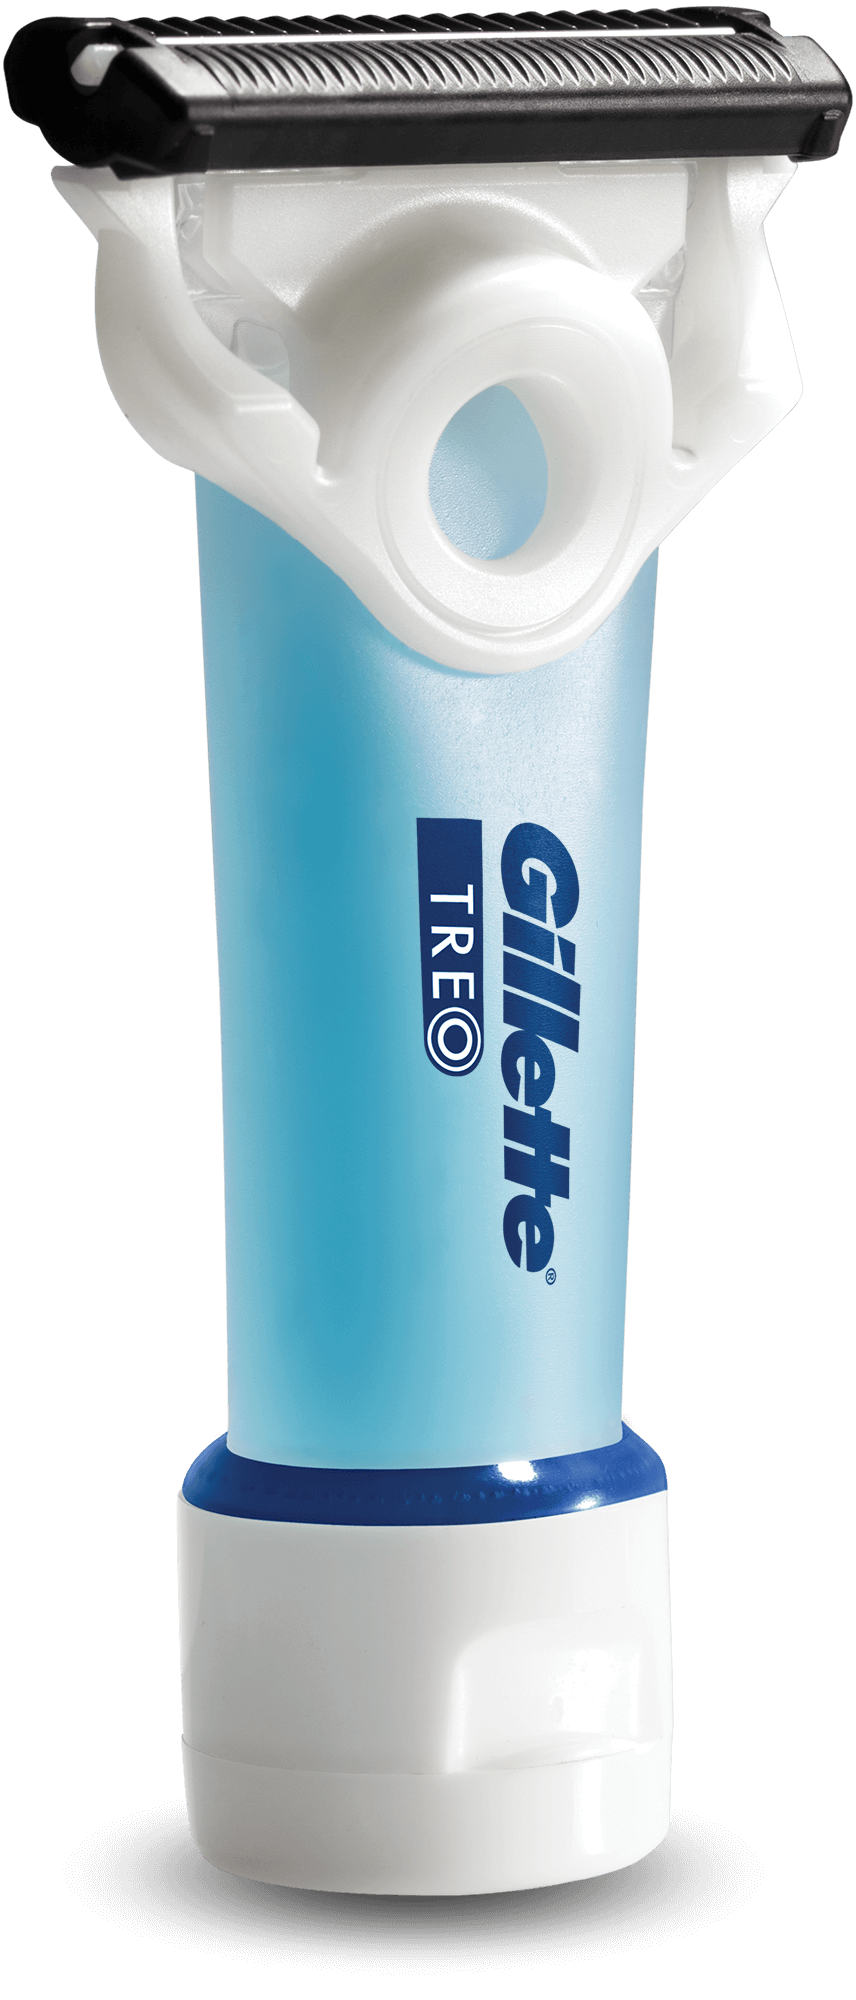 Gillette TREO Razor For Caregivers Features and Benefits | Gillette